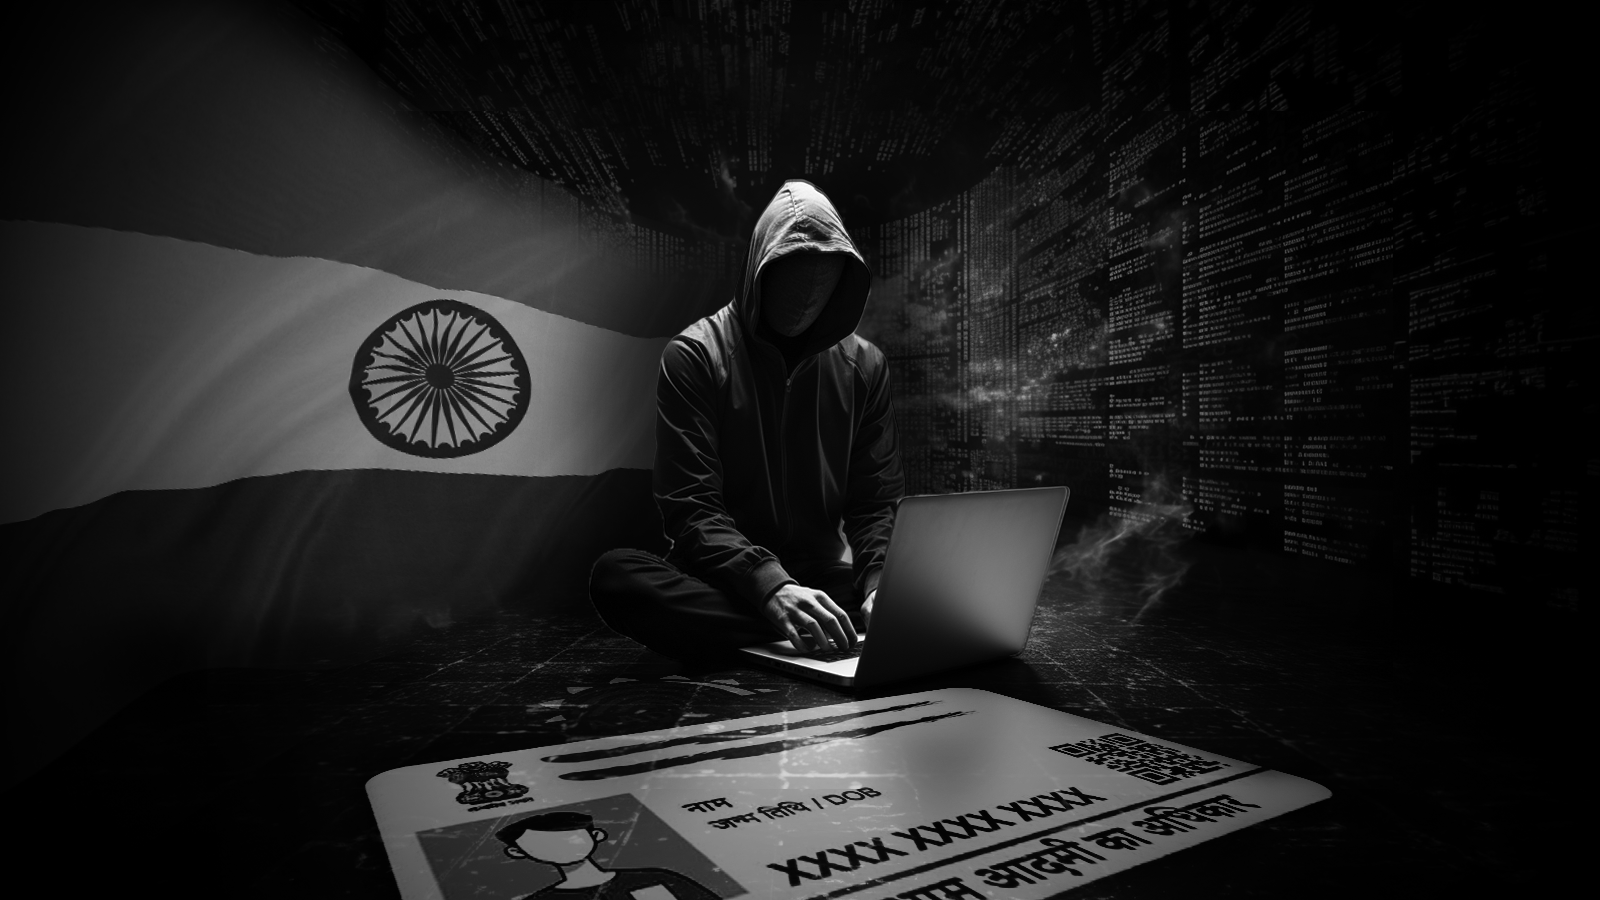 PII Belonging to Indian Citizens, Including their Aadhaar IDs, Offered for Sale on the Dark Web